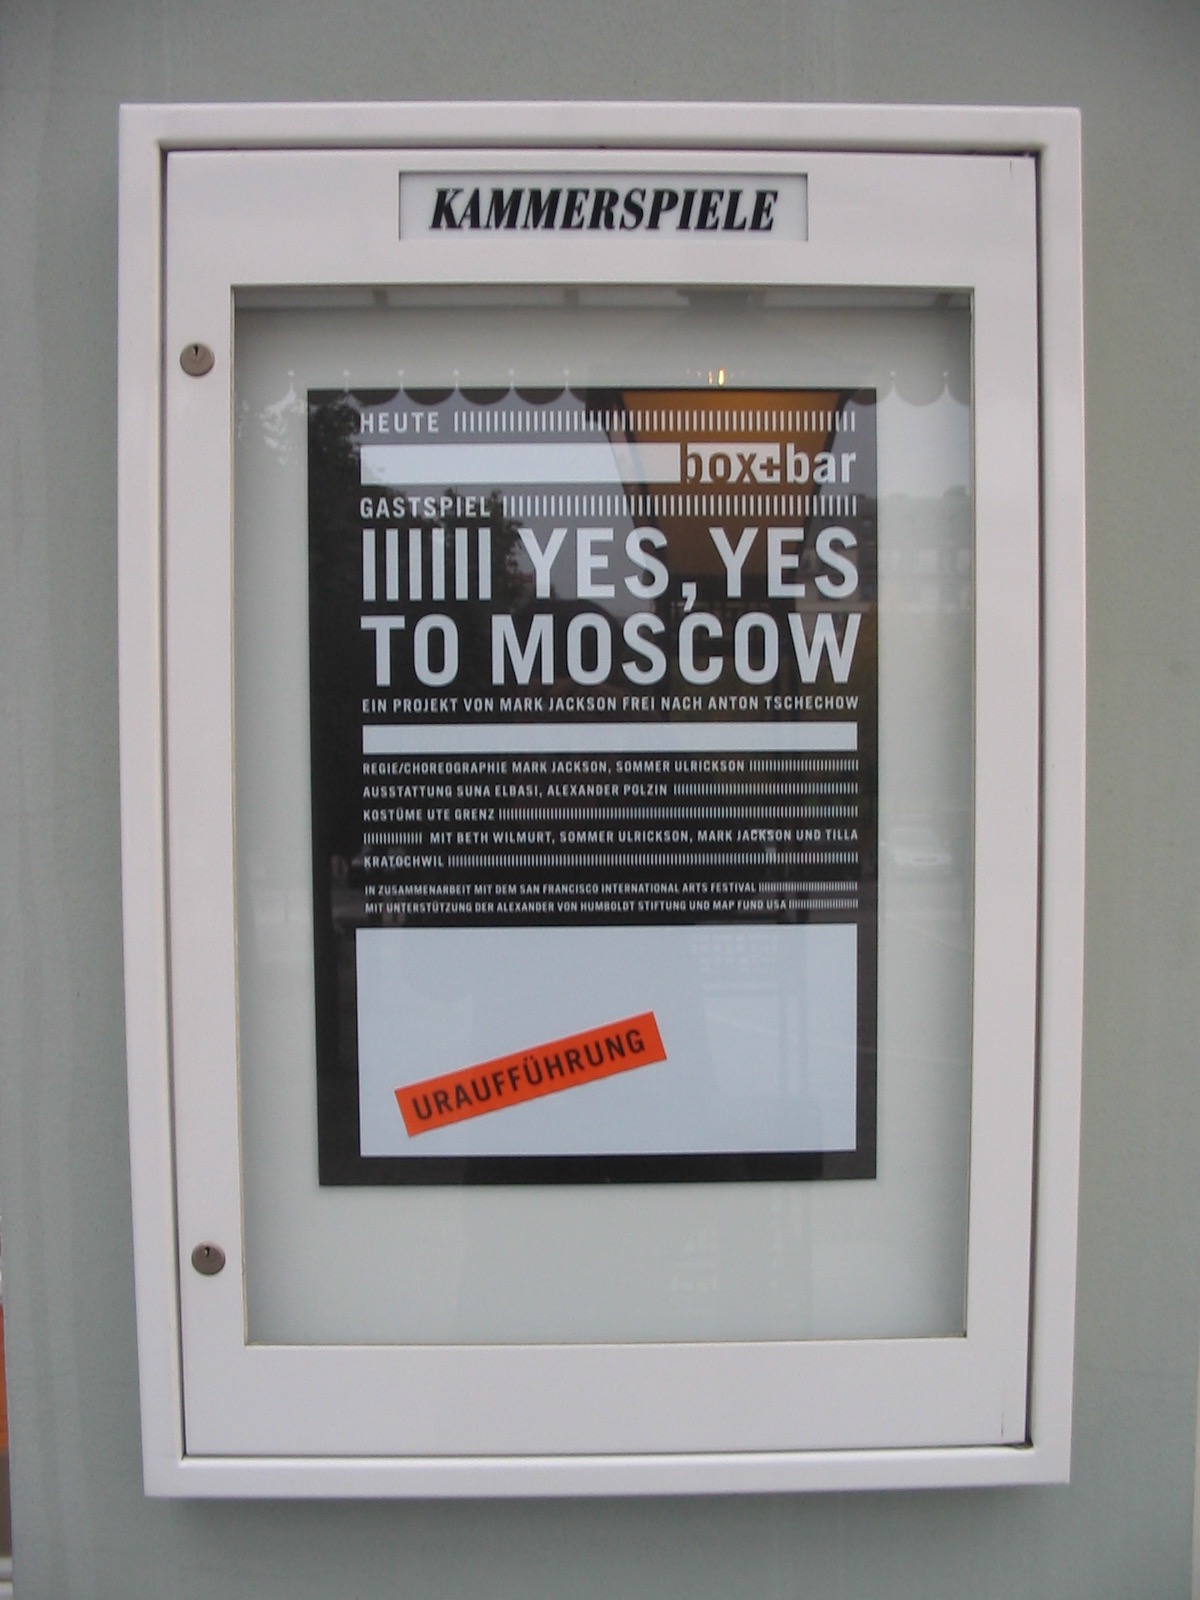   Poster for  Yes Yes to Moscow  at Deutsches Theater Berlin, October 2007.  